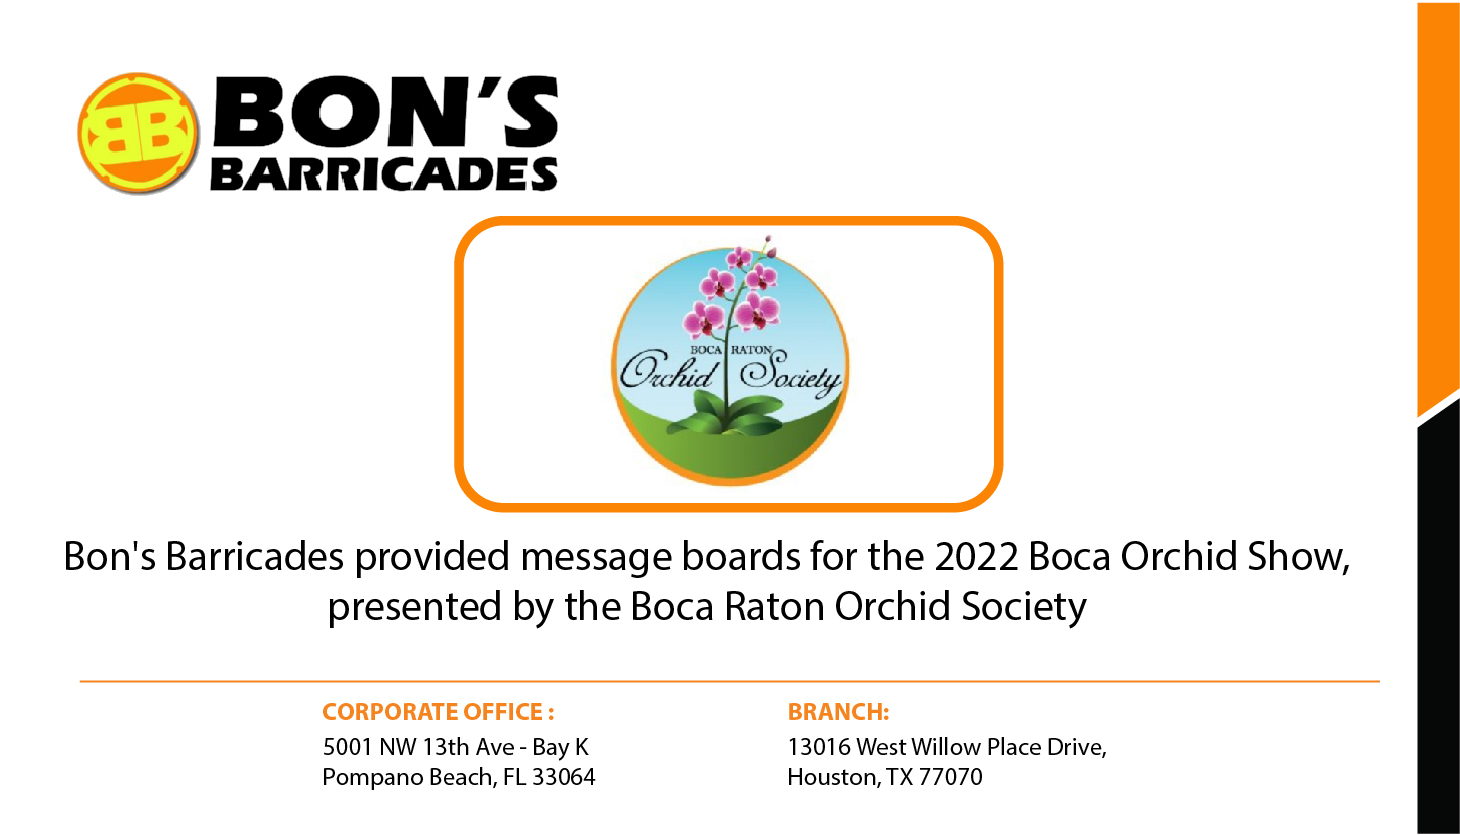 Post about how Bon’s Barricades provided message boards for the 2022 Boca Orchid Show